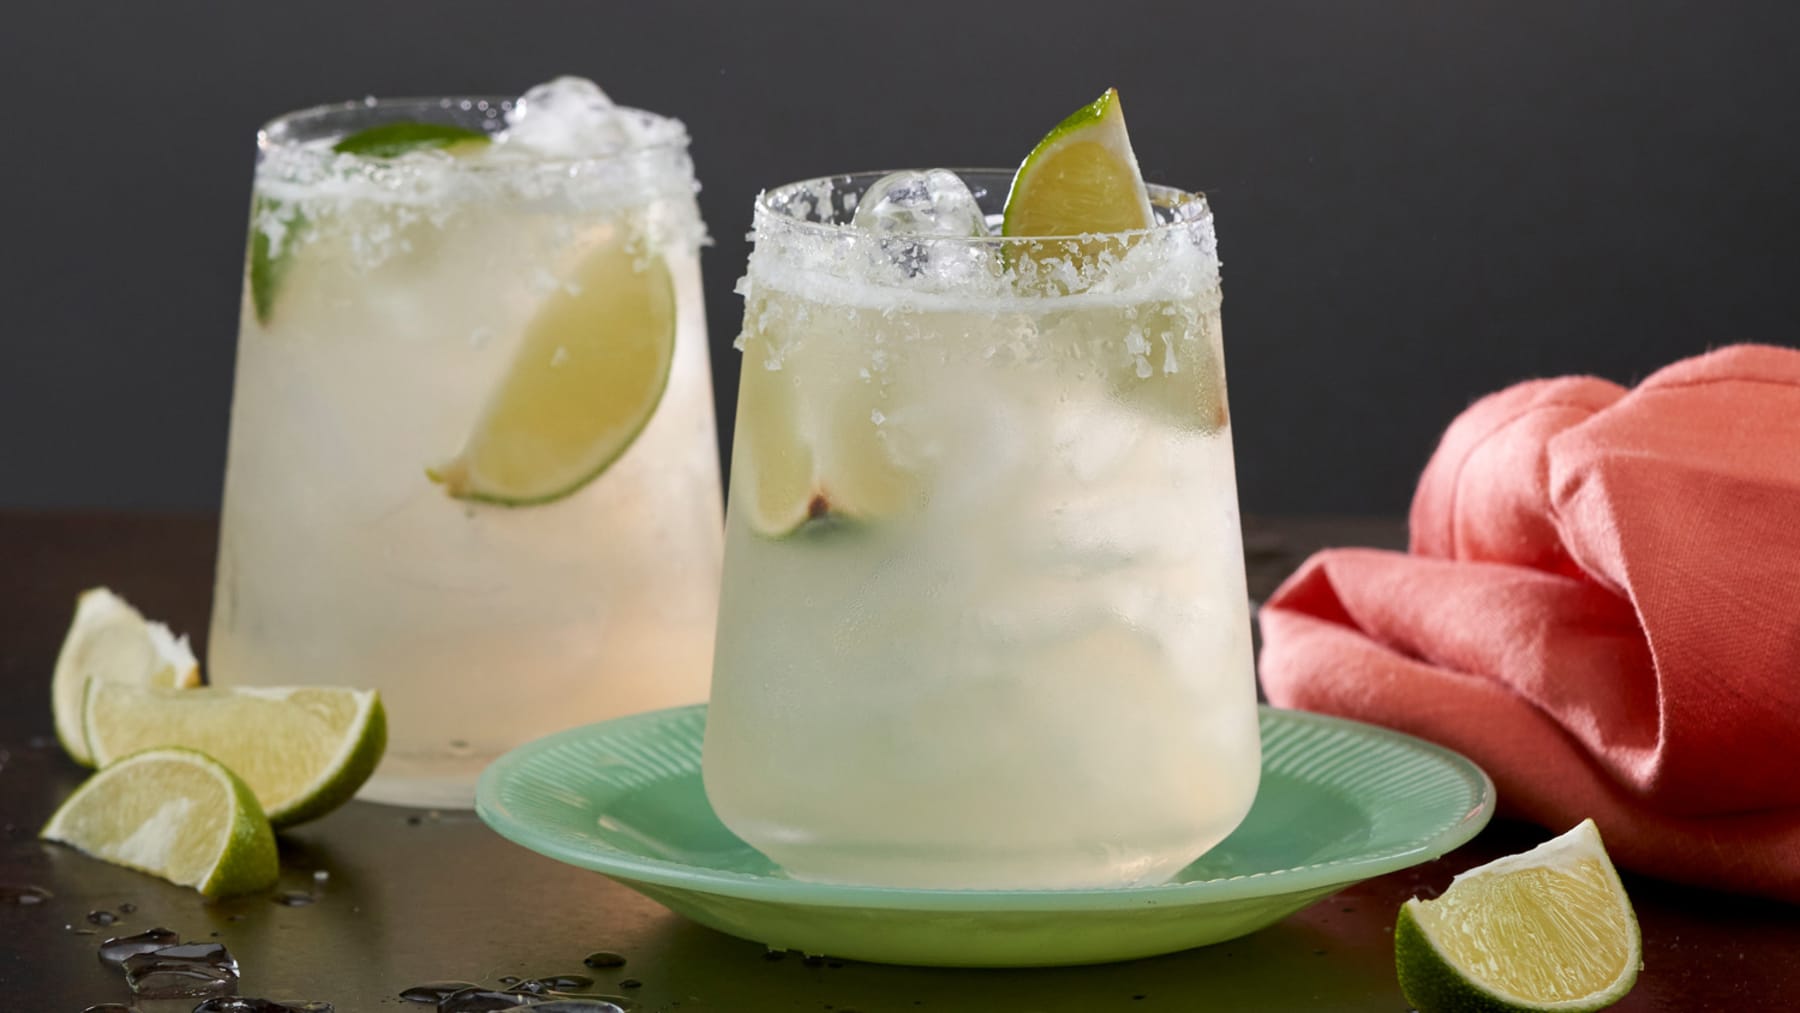 Cocktails made with mezcal, the ancestral Mexican drink